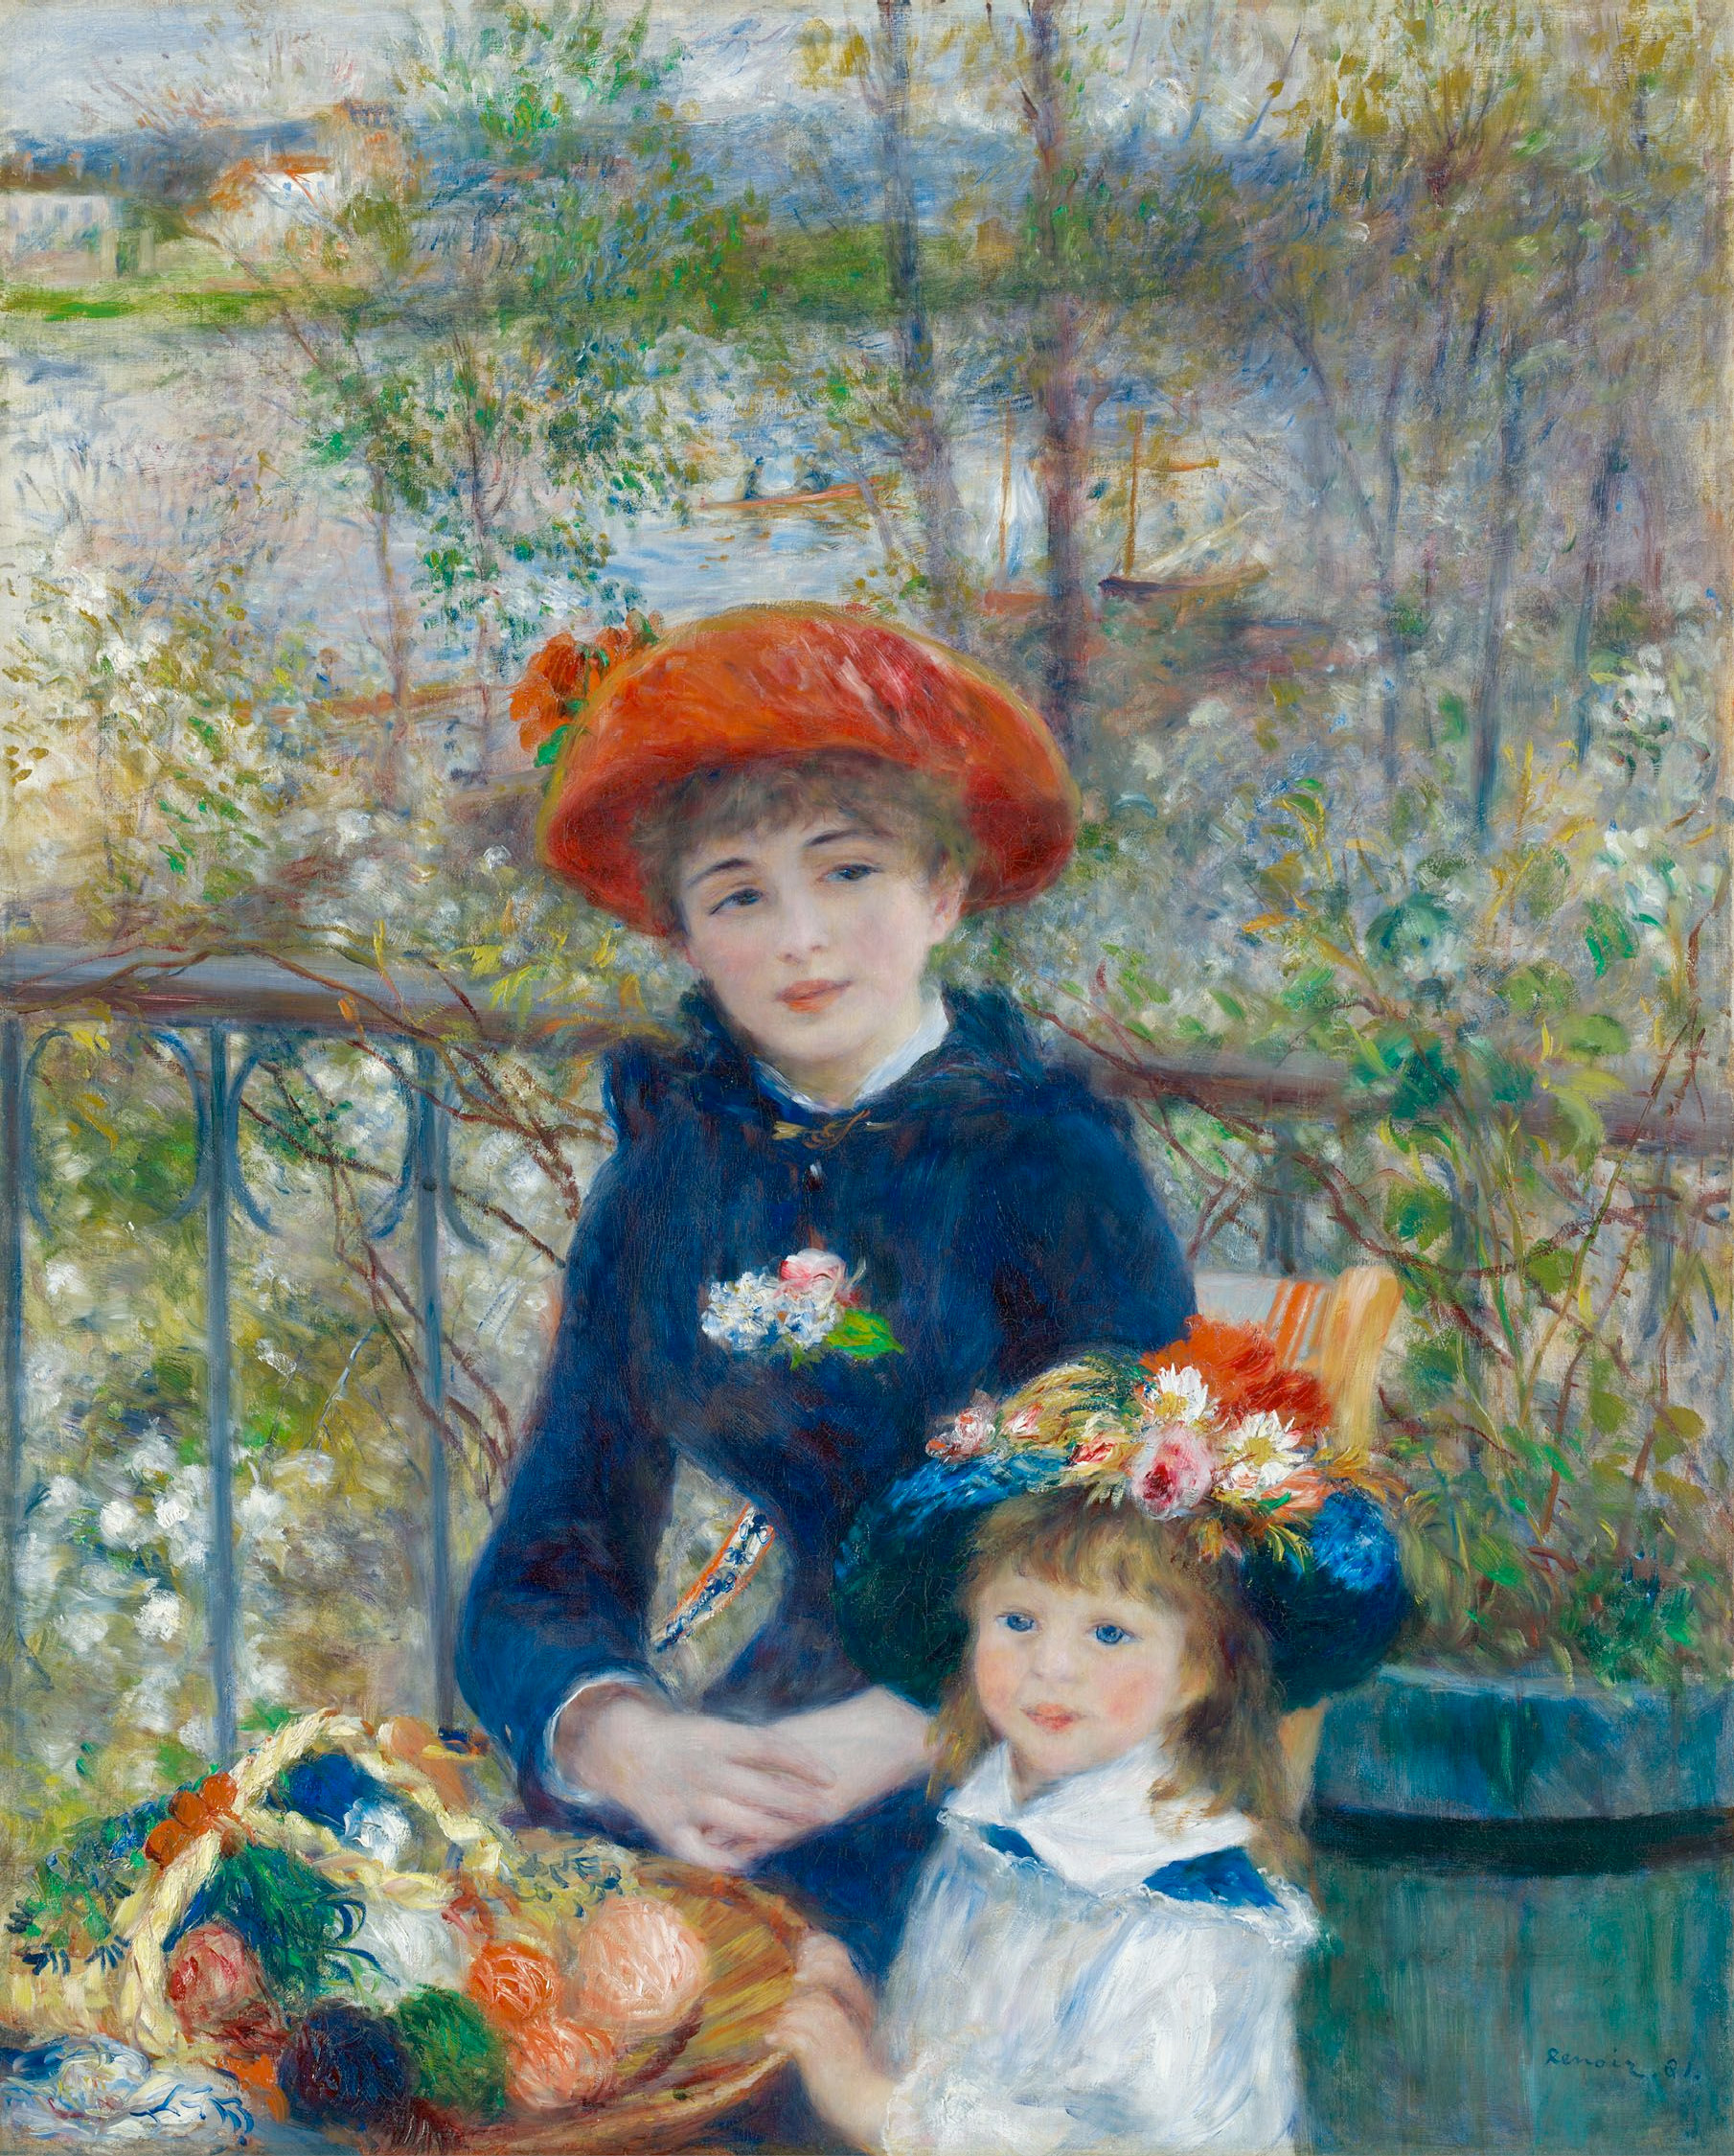 On the Terrace by Pierre-Auguste Renoir - 1881 - 100 × 80 cm Art Institute of Chicago